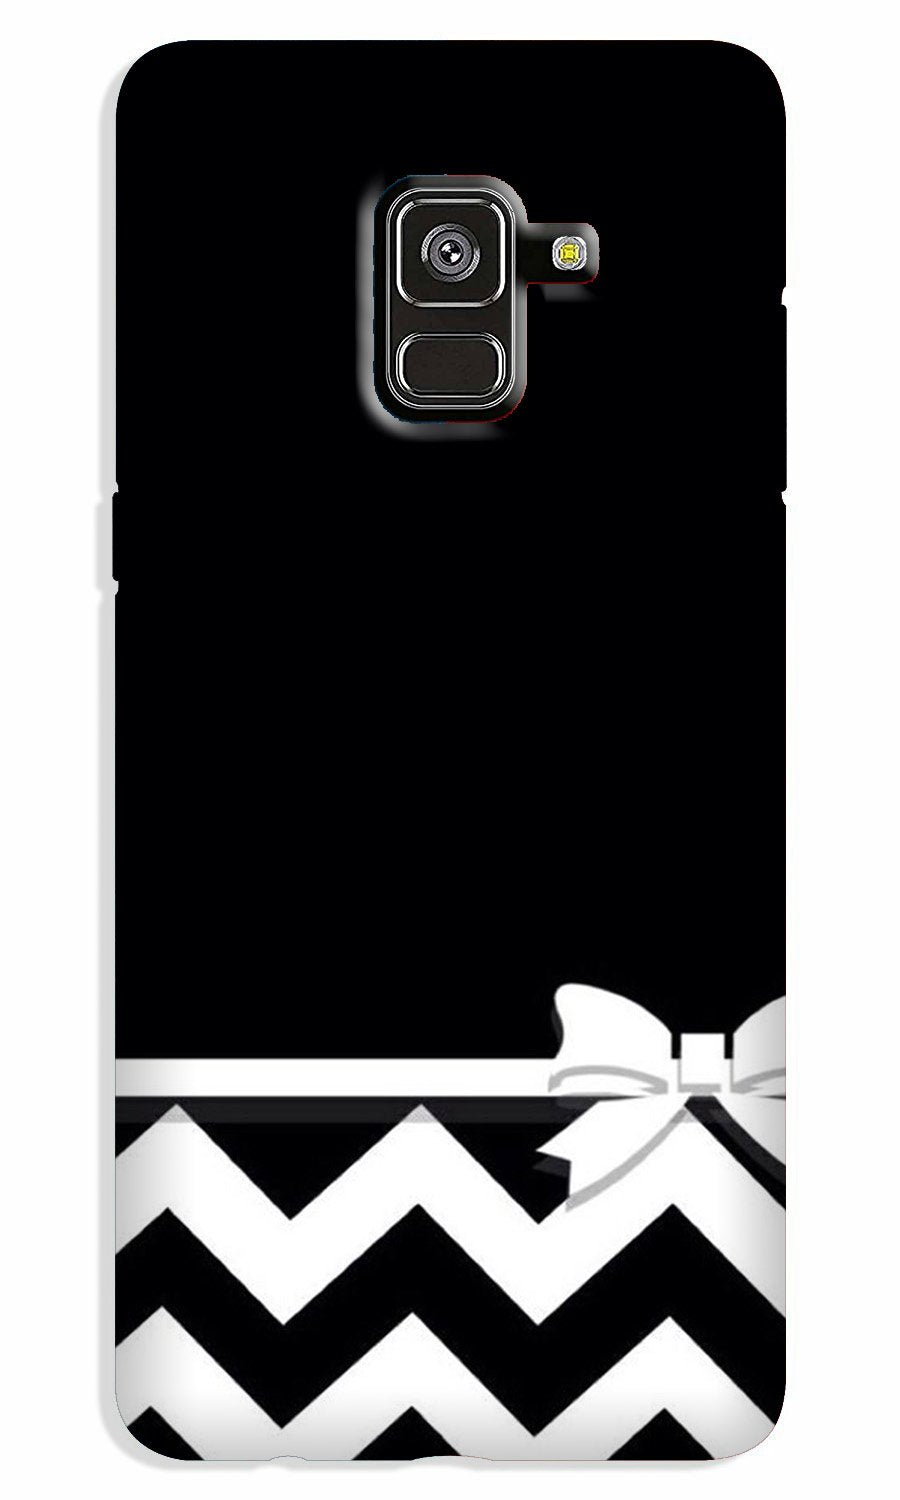 Gift Wrap7 Case for Galaxy A8 Plus